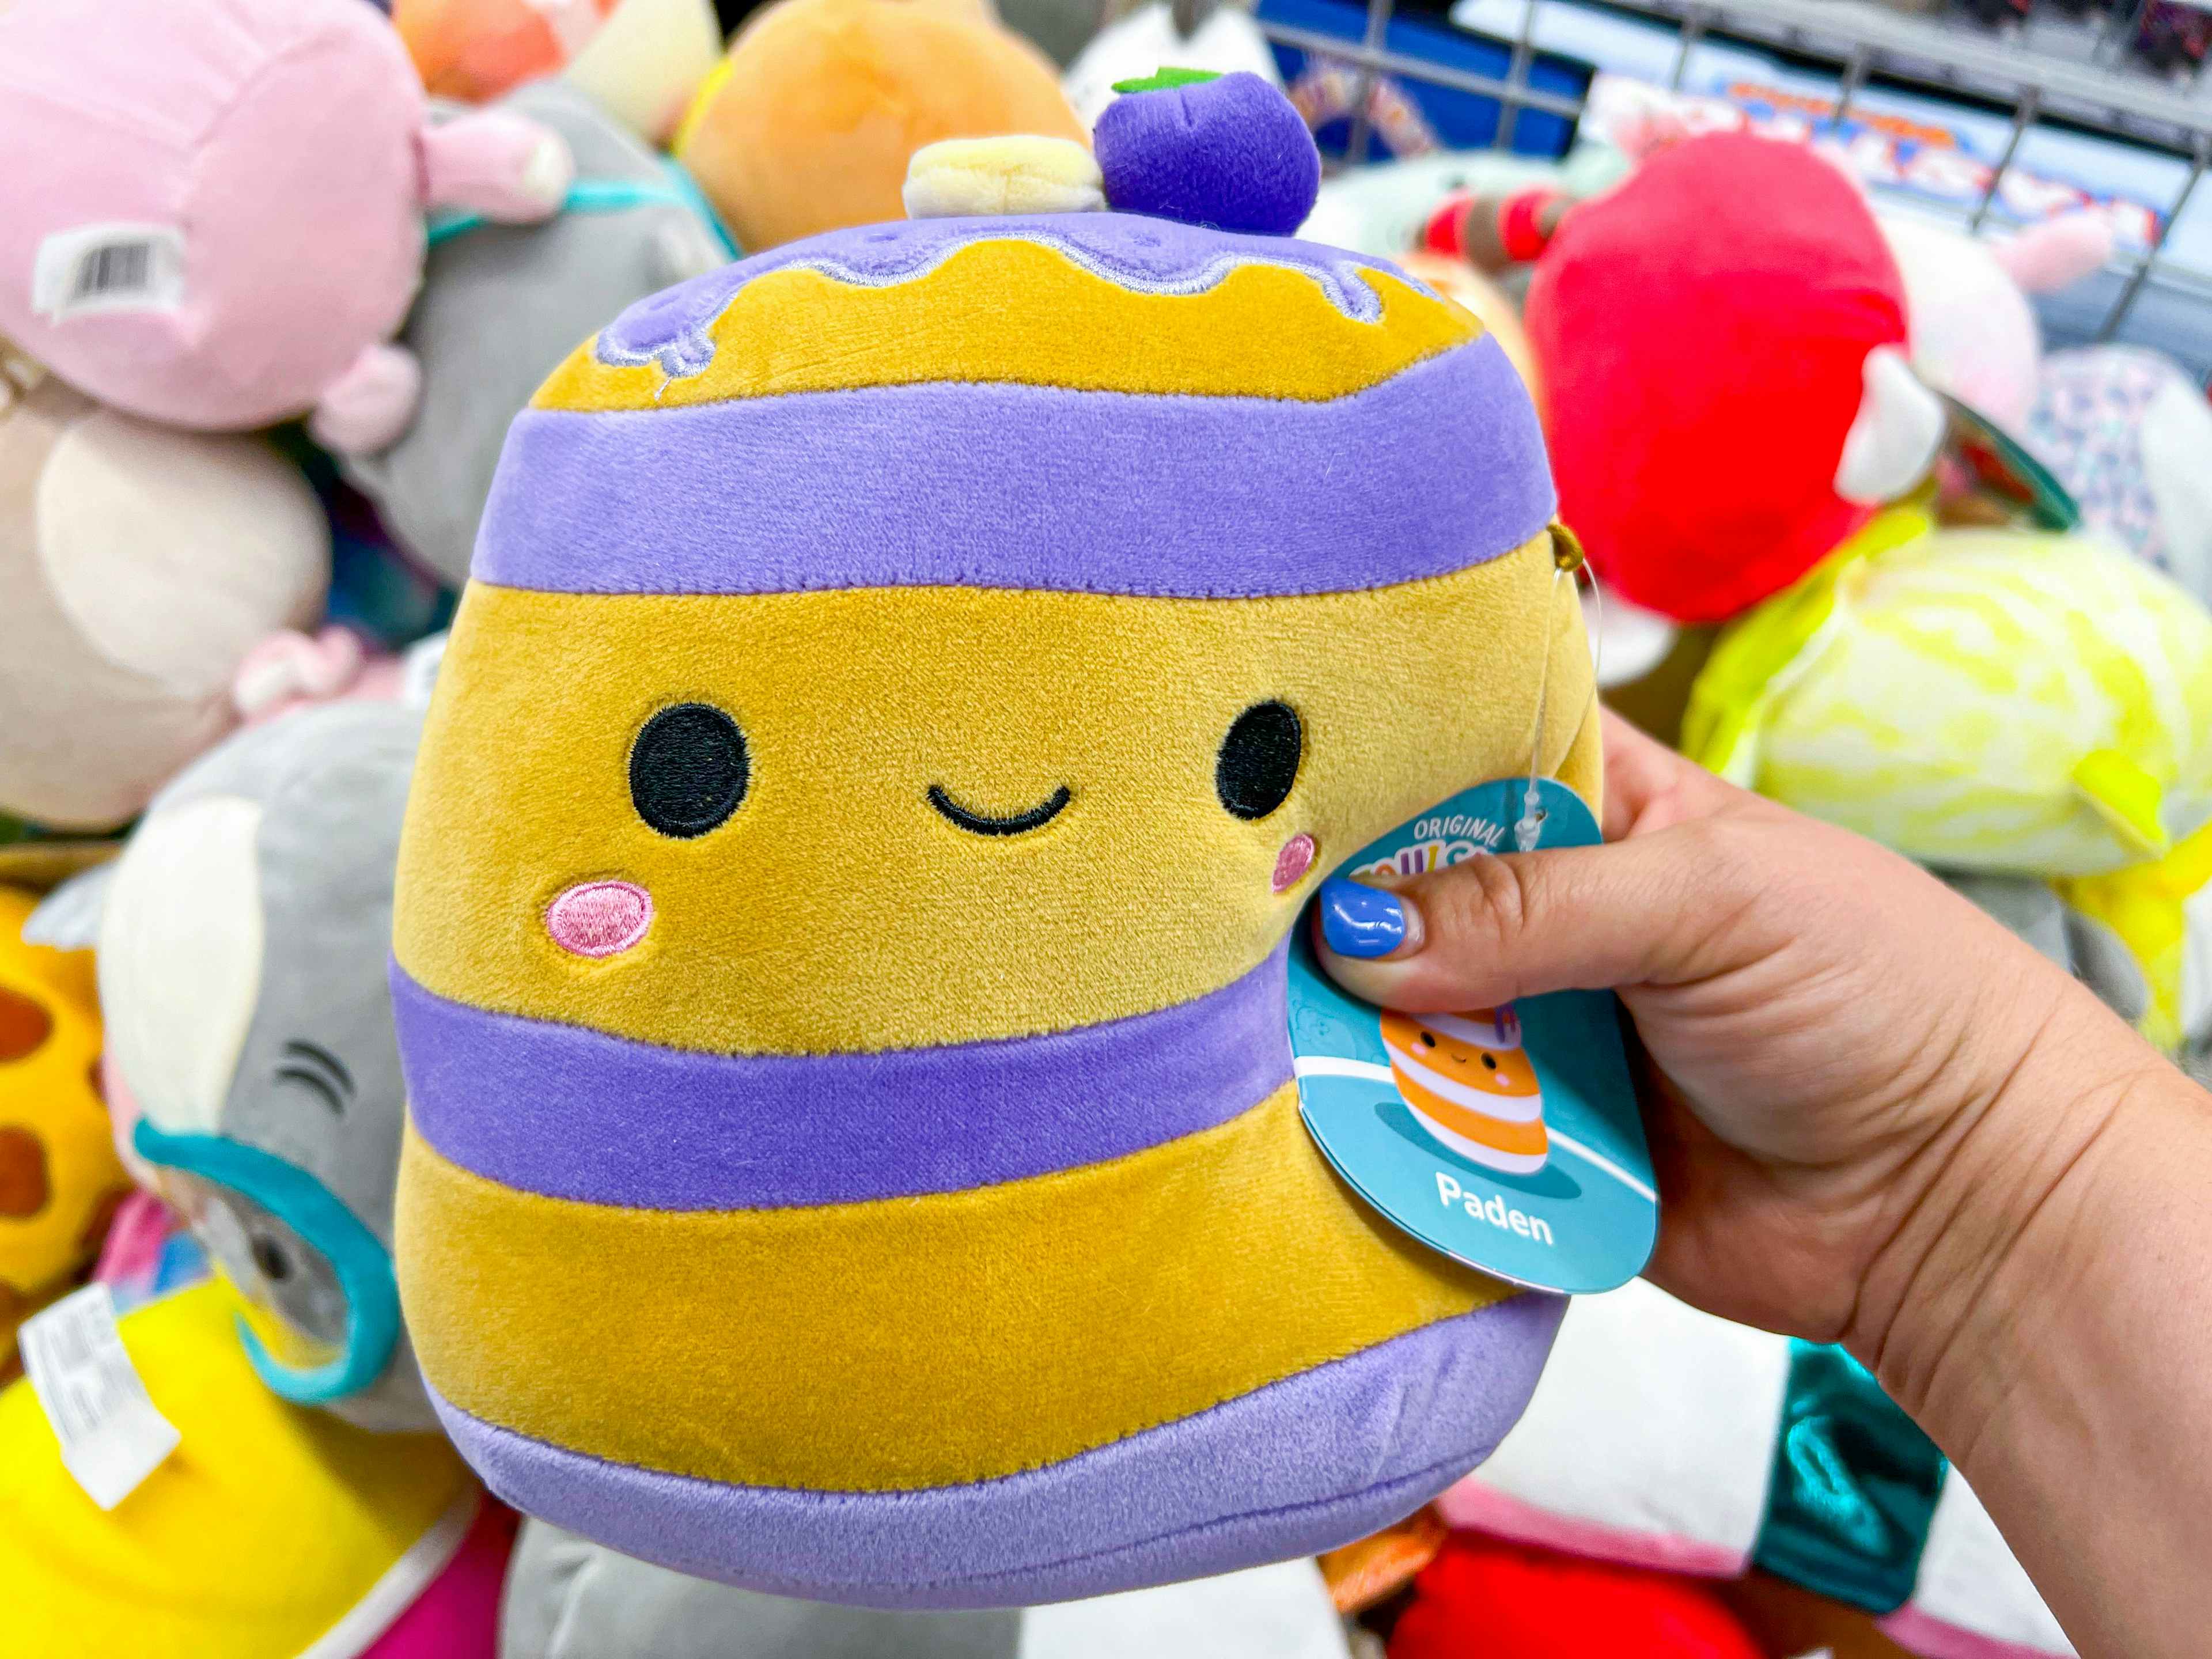 Paden the Pancake yellow and purple squishmallow toy held by a hand